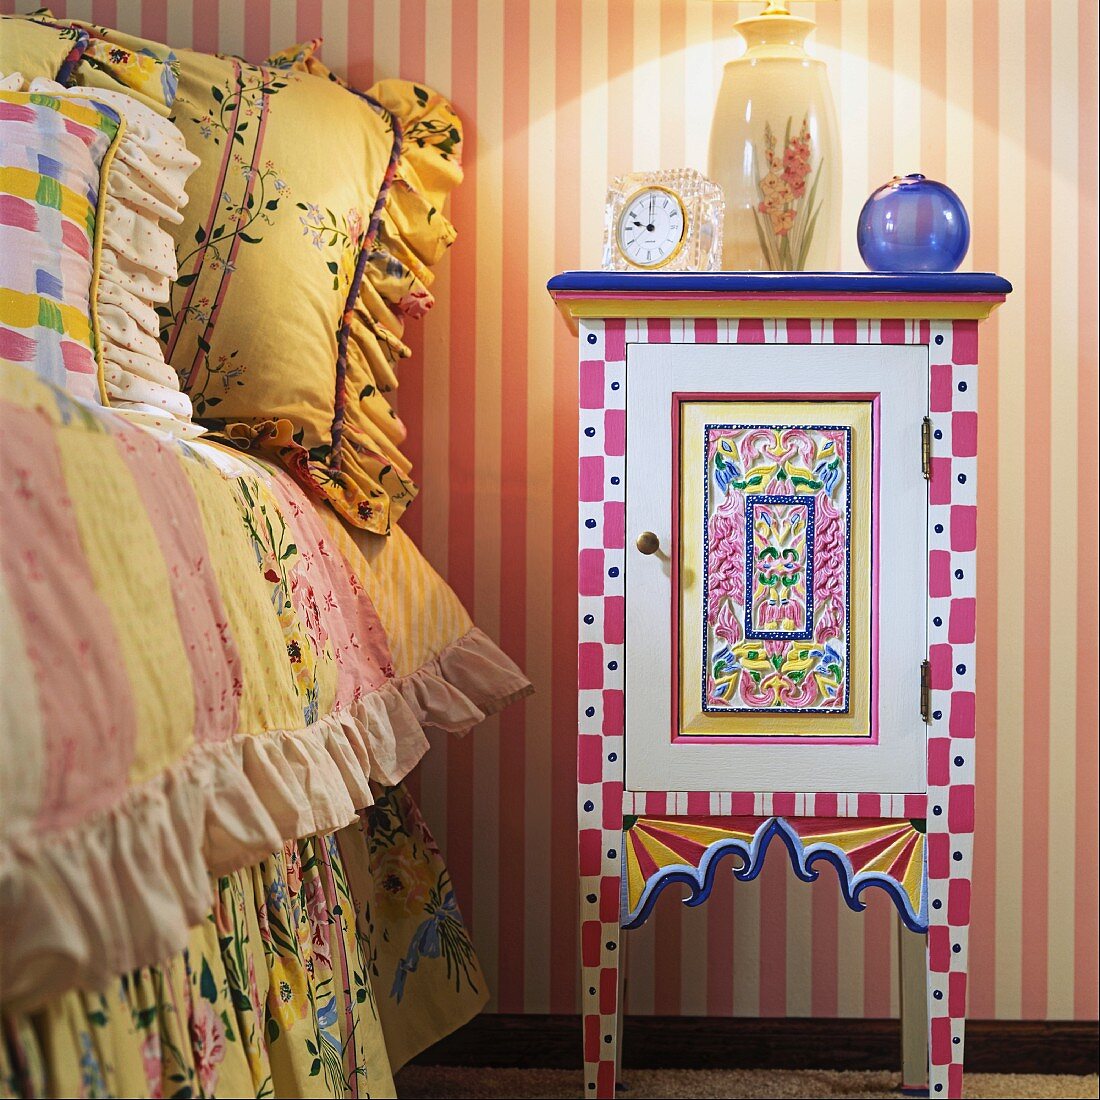 Hand-painted, colourful bedside cabinet next to child's bed with pretty cushions and ruffled bedspread; pink and white striped wallpaper